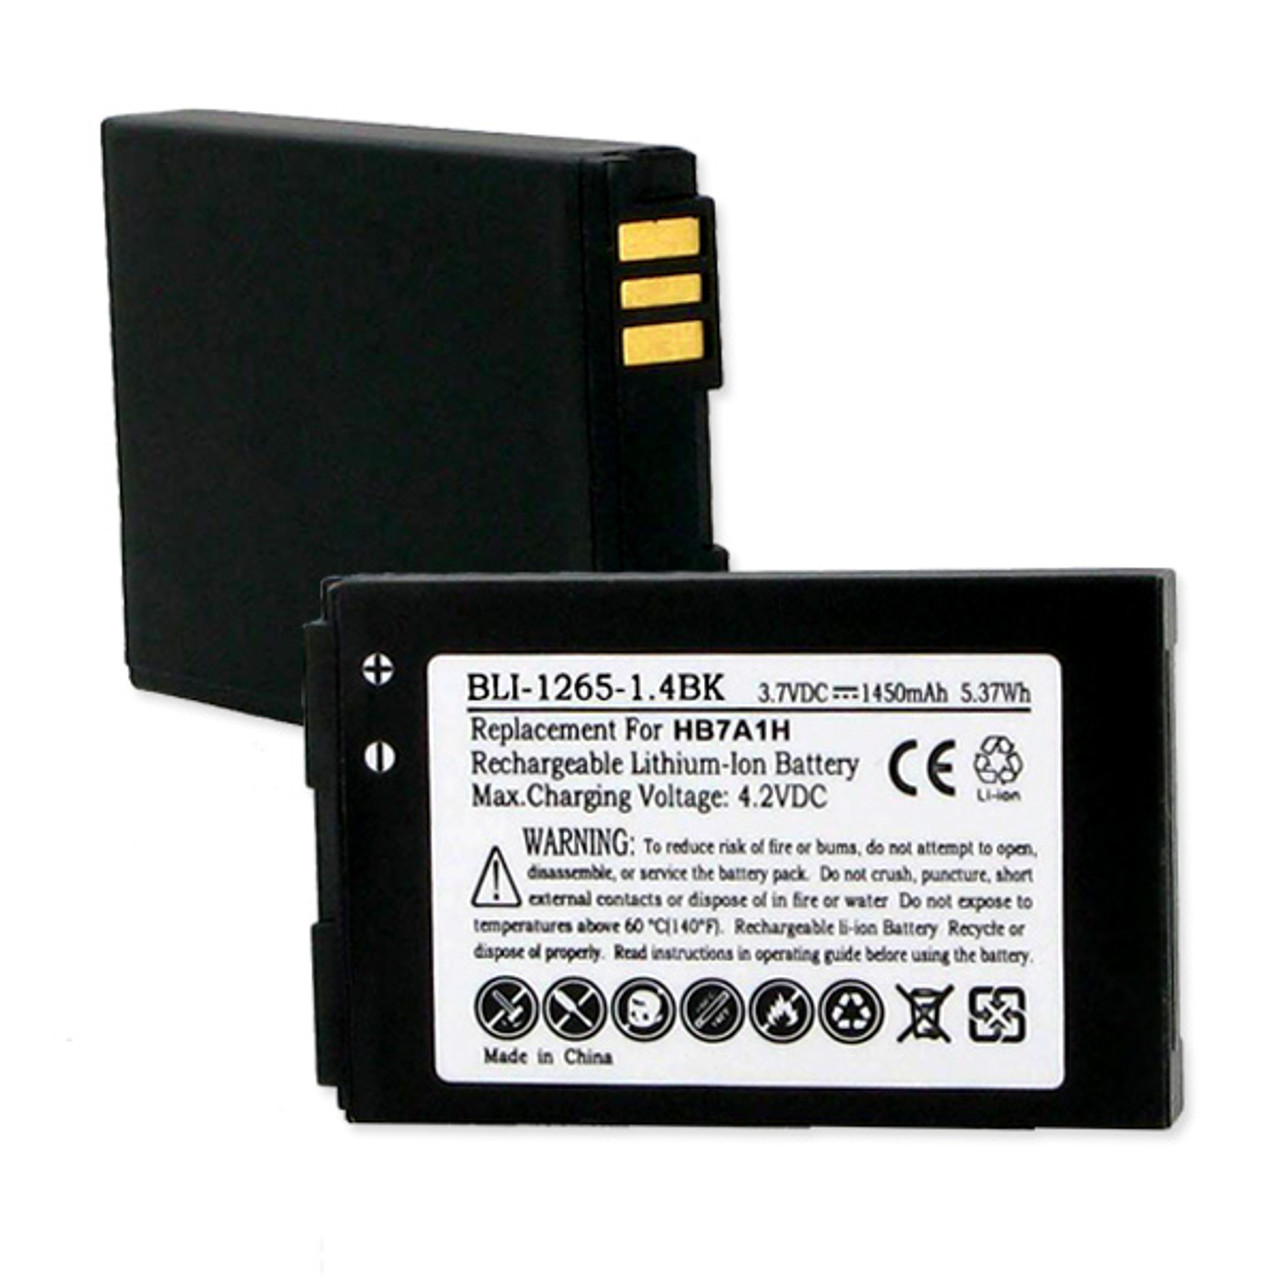 Huawei T-Mobile Mifi E583C Wireless Pointer Battery for Wireless Internet Hotspot - Wi-Fi Aircard